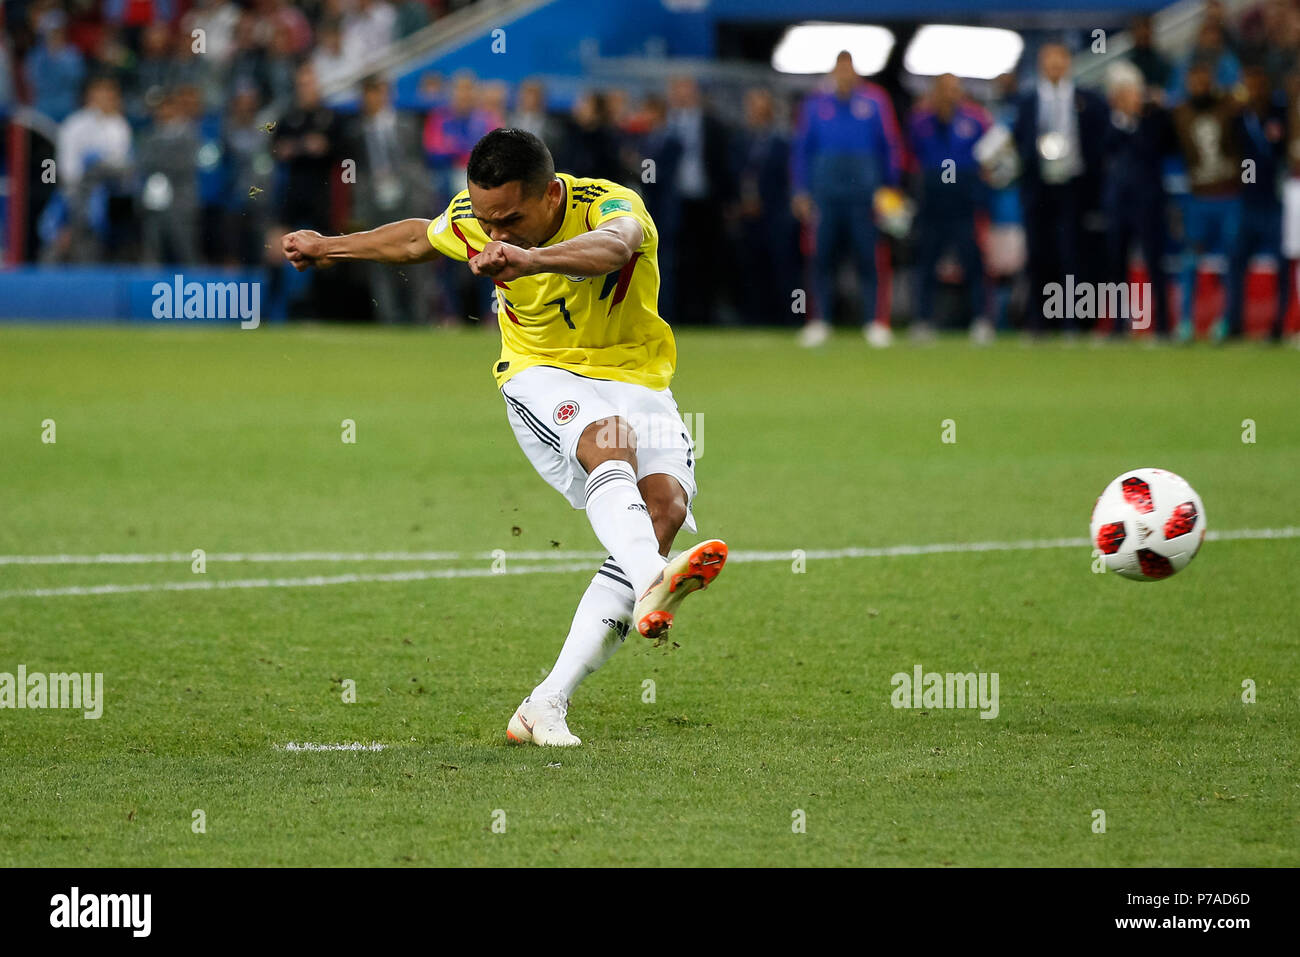 Moscow, Russia. 3rd July, 2018. Carlos Bacca of Colombia misses his penalty during the penalty shootout after the 2018 FIFA World Cup Round of 16 match between Colombia and England at Spartak Stadium on July 3rd 2018 in Moscow, Russia. (Photo by Daniel Chesterton/phcimages.com) Credit: PHC Images/Alamy Live News Stock Photo